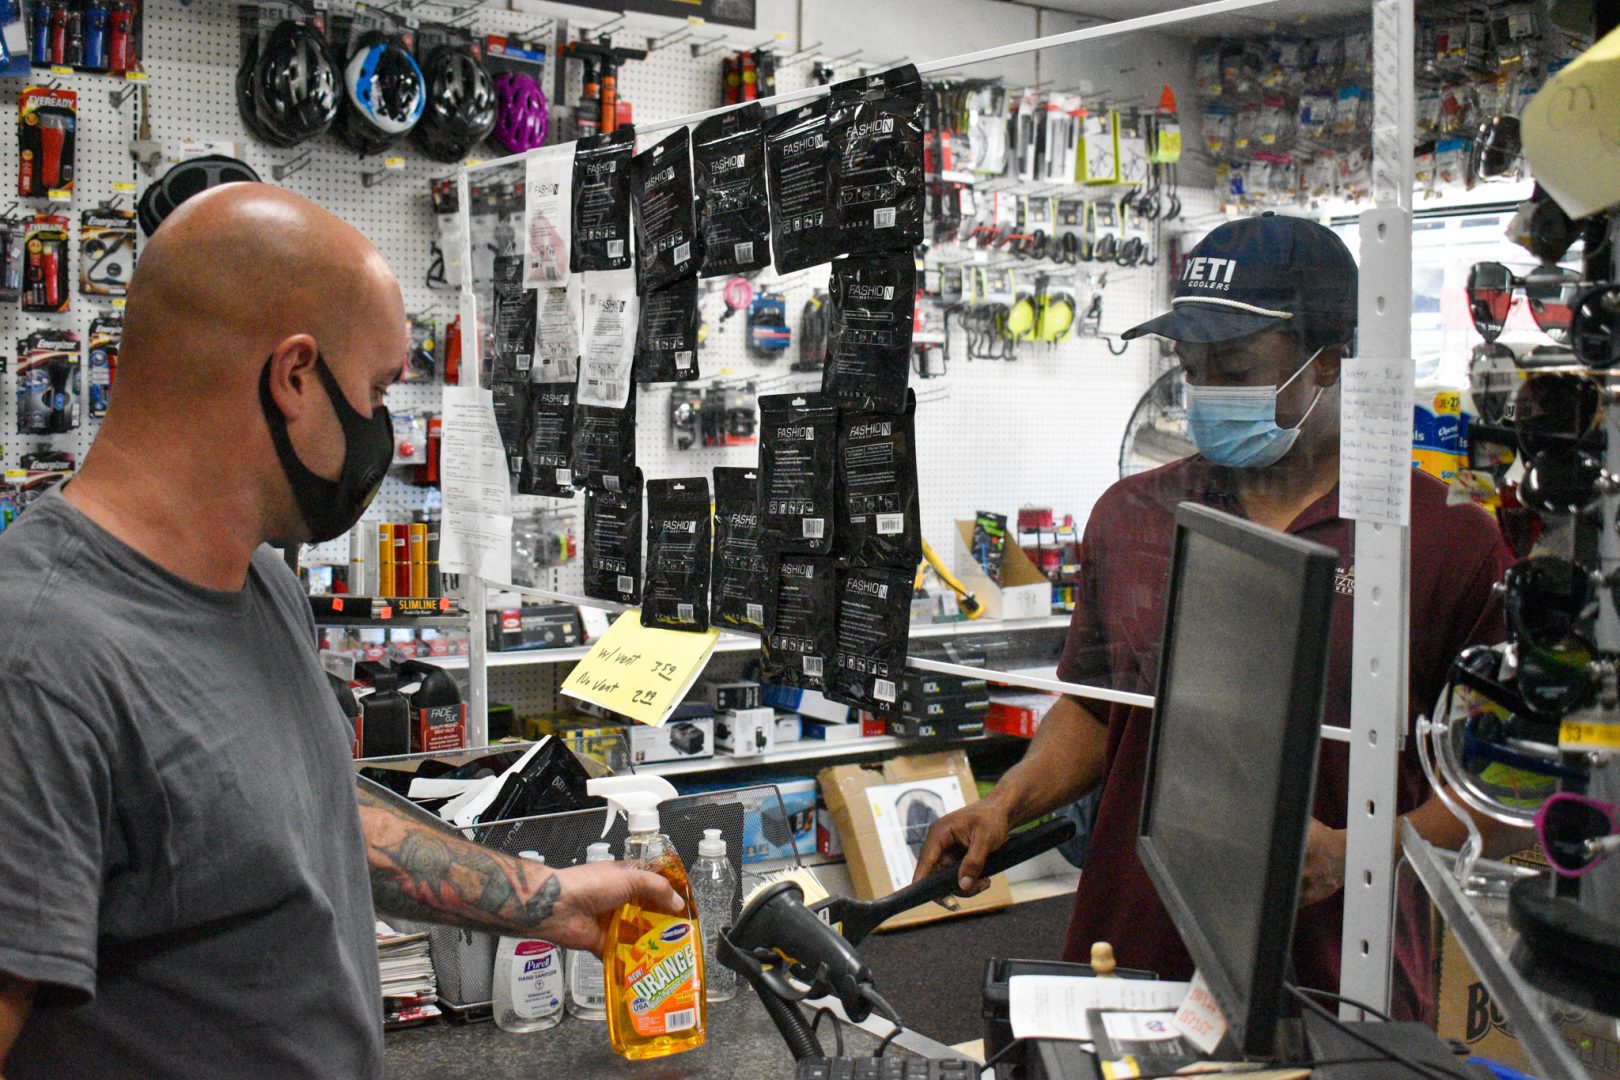 With a pane of clear plastic between them, Brandyn Hamilton, at right, buys some home cleaning products from David Arnold, at left, at Hornung's True Value Hardware in Harrisburg. 